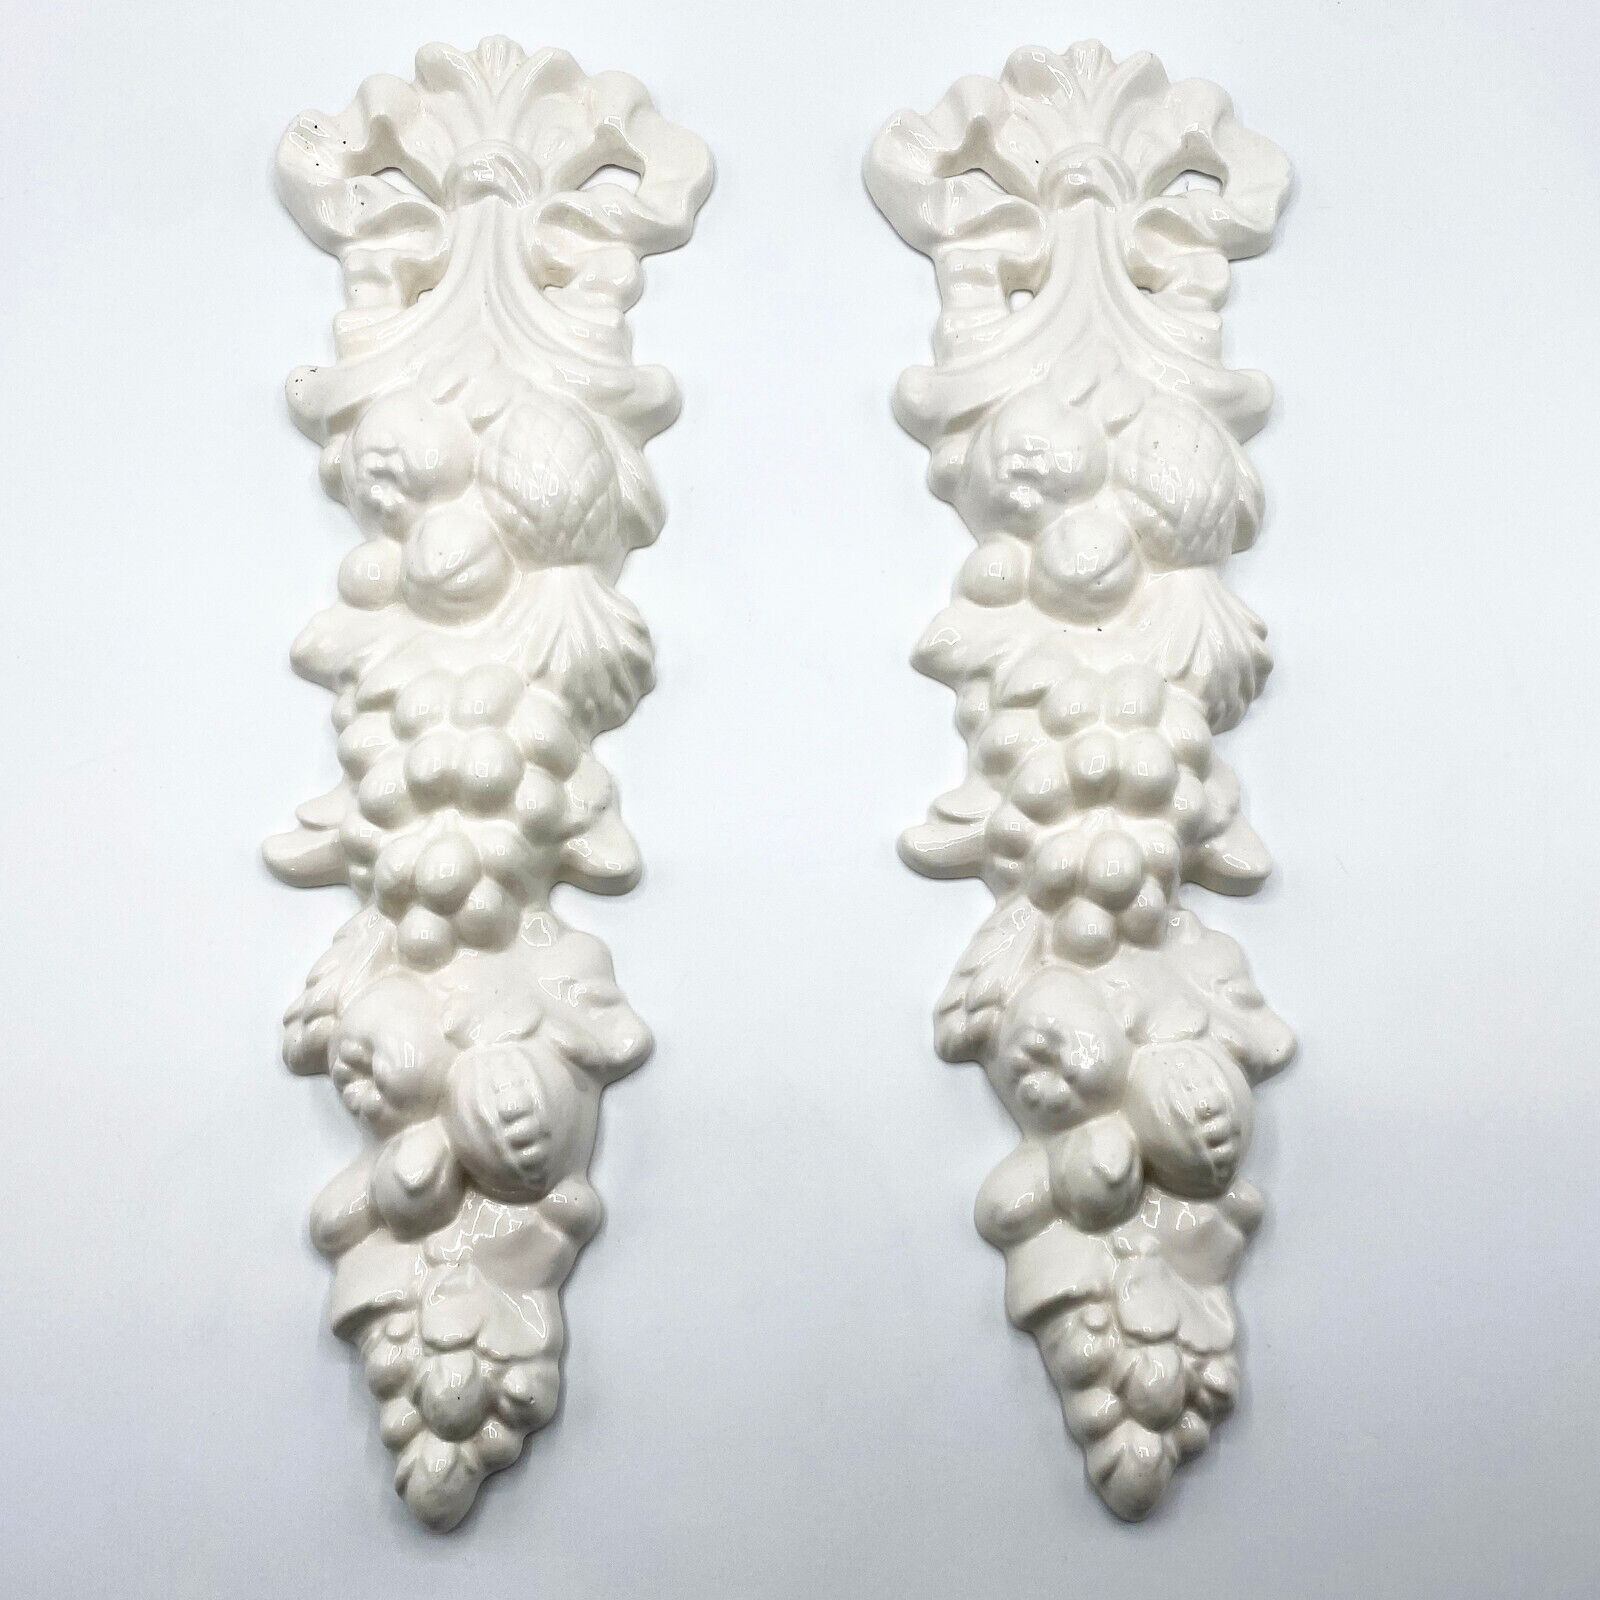 Vintage 70s Pair of Glossy White Ceramic Wall Hangings - Bow Ribbon Fruit Leaves